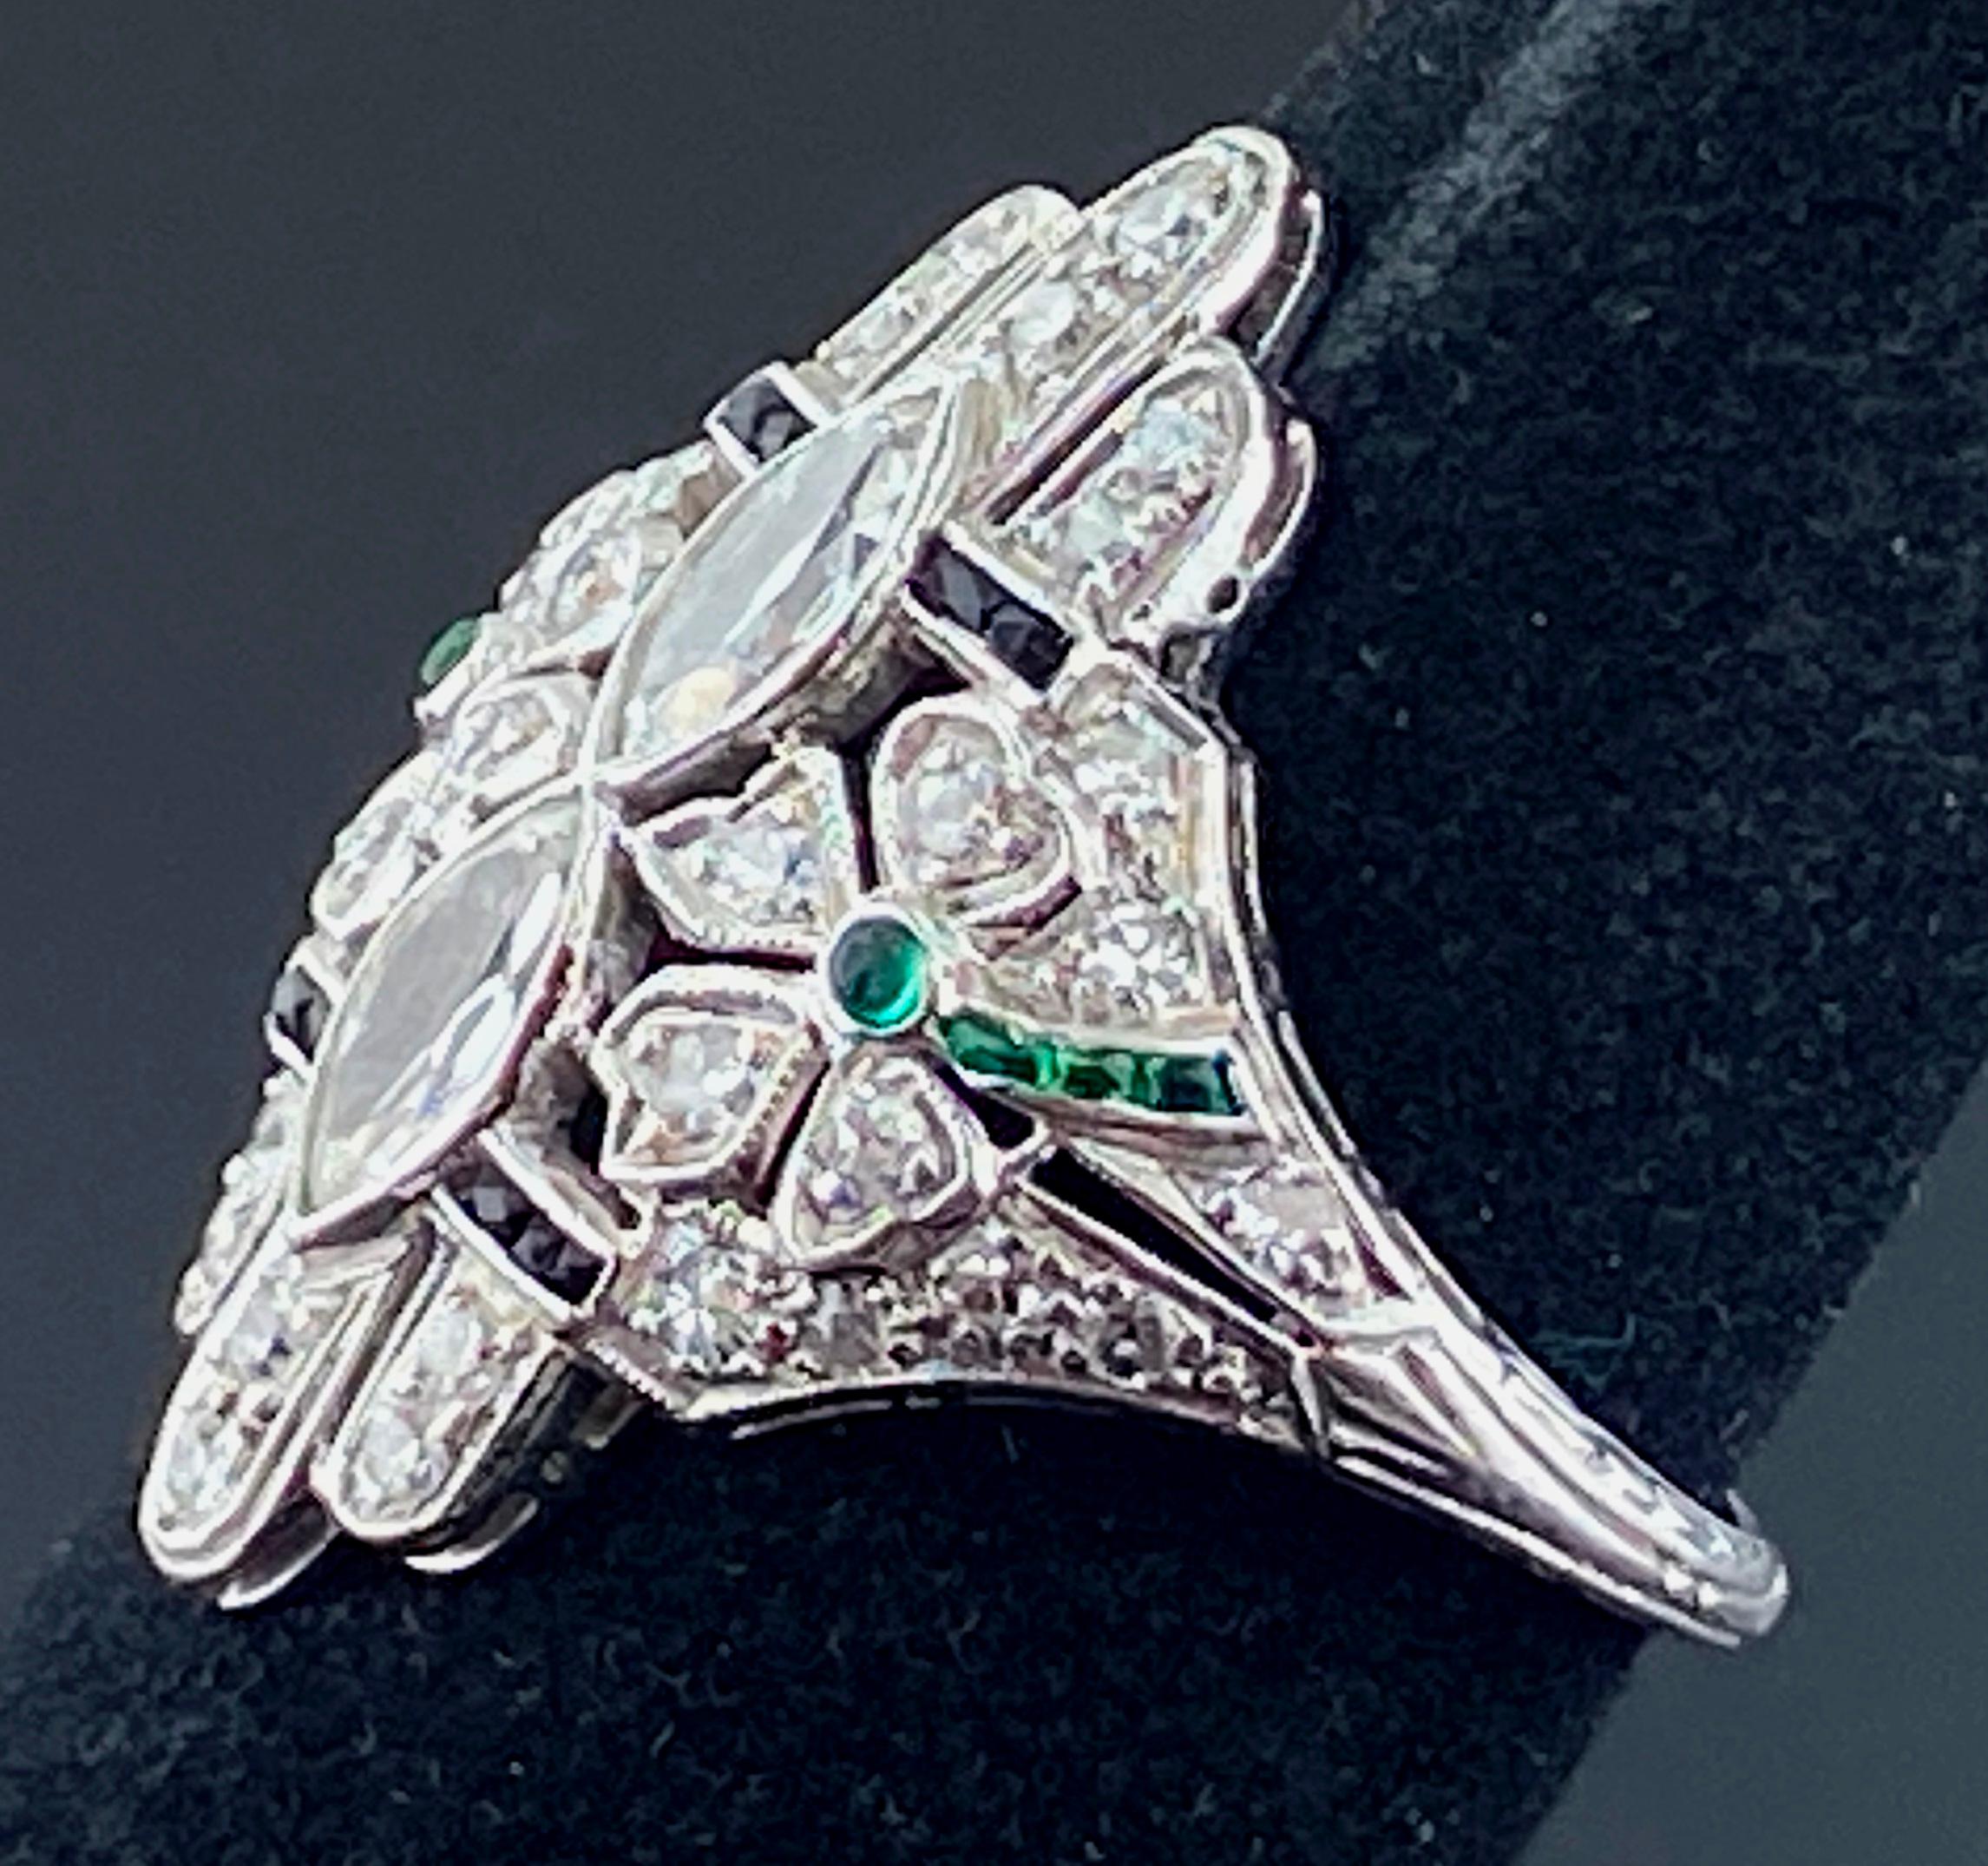 Set in Platinum, in the center, are two Marquise cut Diamonds weighing 0.66 carats in total, Color: I-J, Clarity: VS-2, plus 36 Round Brilliant cut diamonds weighing 0.70 carats, 1.36 carats total diamond weight,  enhanced with two Round Cut and 6